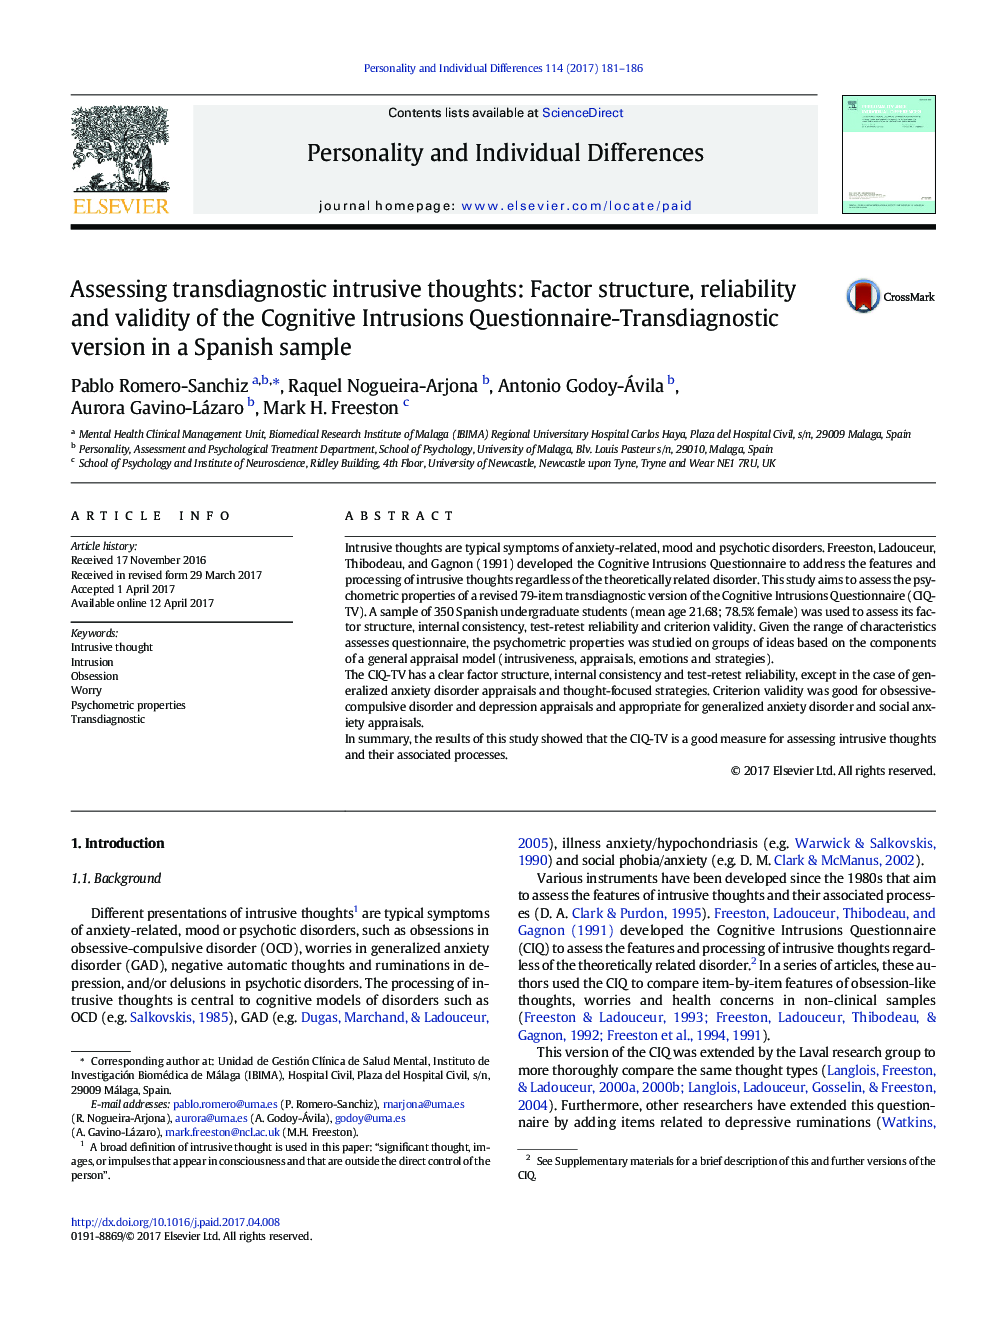 Assessing transdiagnostic intrusive thoughts: Factor structure, reliability and validity of the Cognitive Intrusions Questionnaire-Transdiagnostic version in a Spanish sample